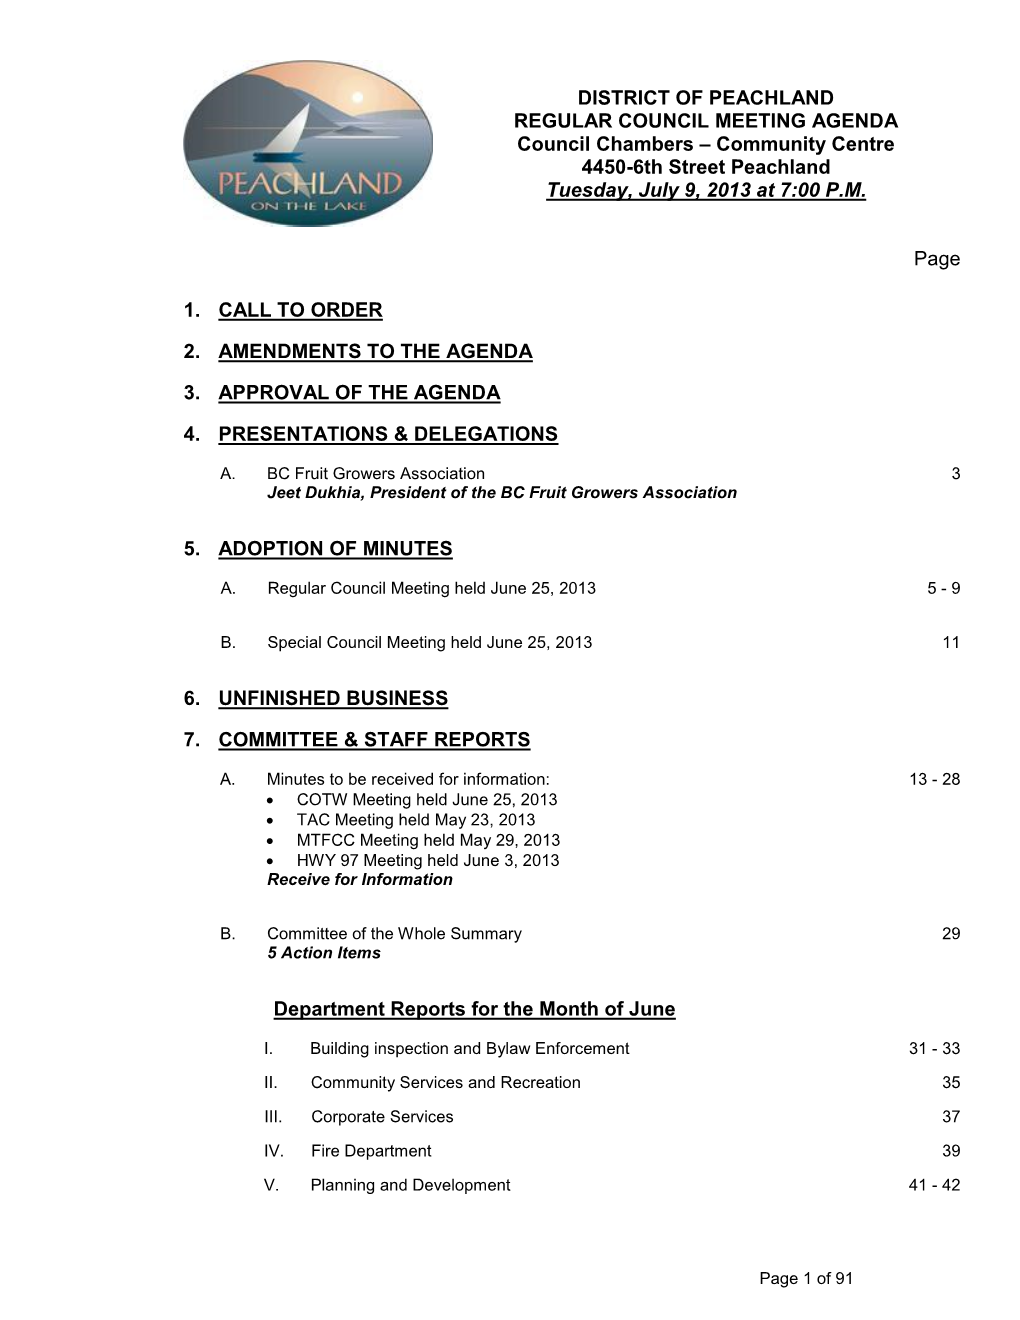 DISTRICT of PEACHLAND REGULAR COUNCIL MEETING AGENDA Council Chambers – Community Centre 4450-6Th Street Peachland Tuesday, July 9, 2013 at 7:00 P.M